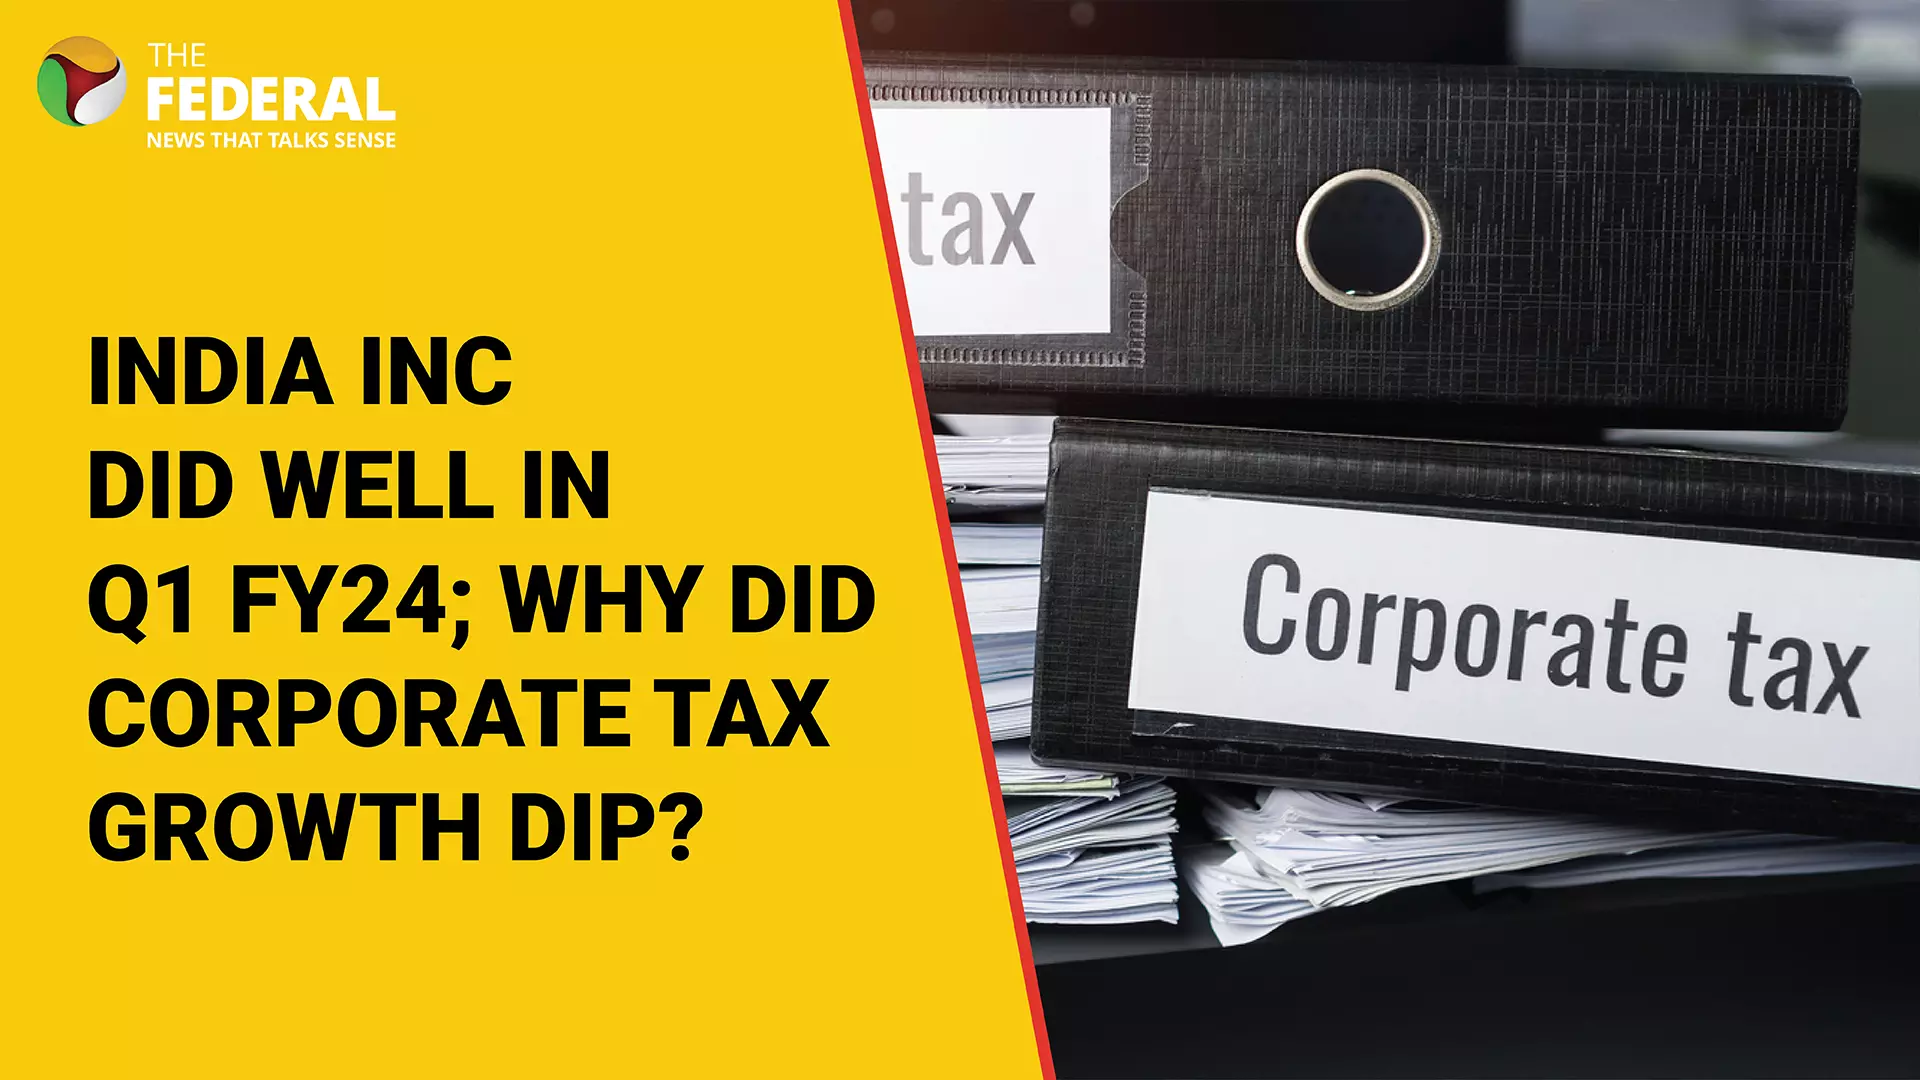 India Inc did well in Q1 FY24; why did corporate tax growth dip?